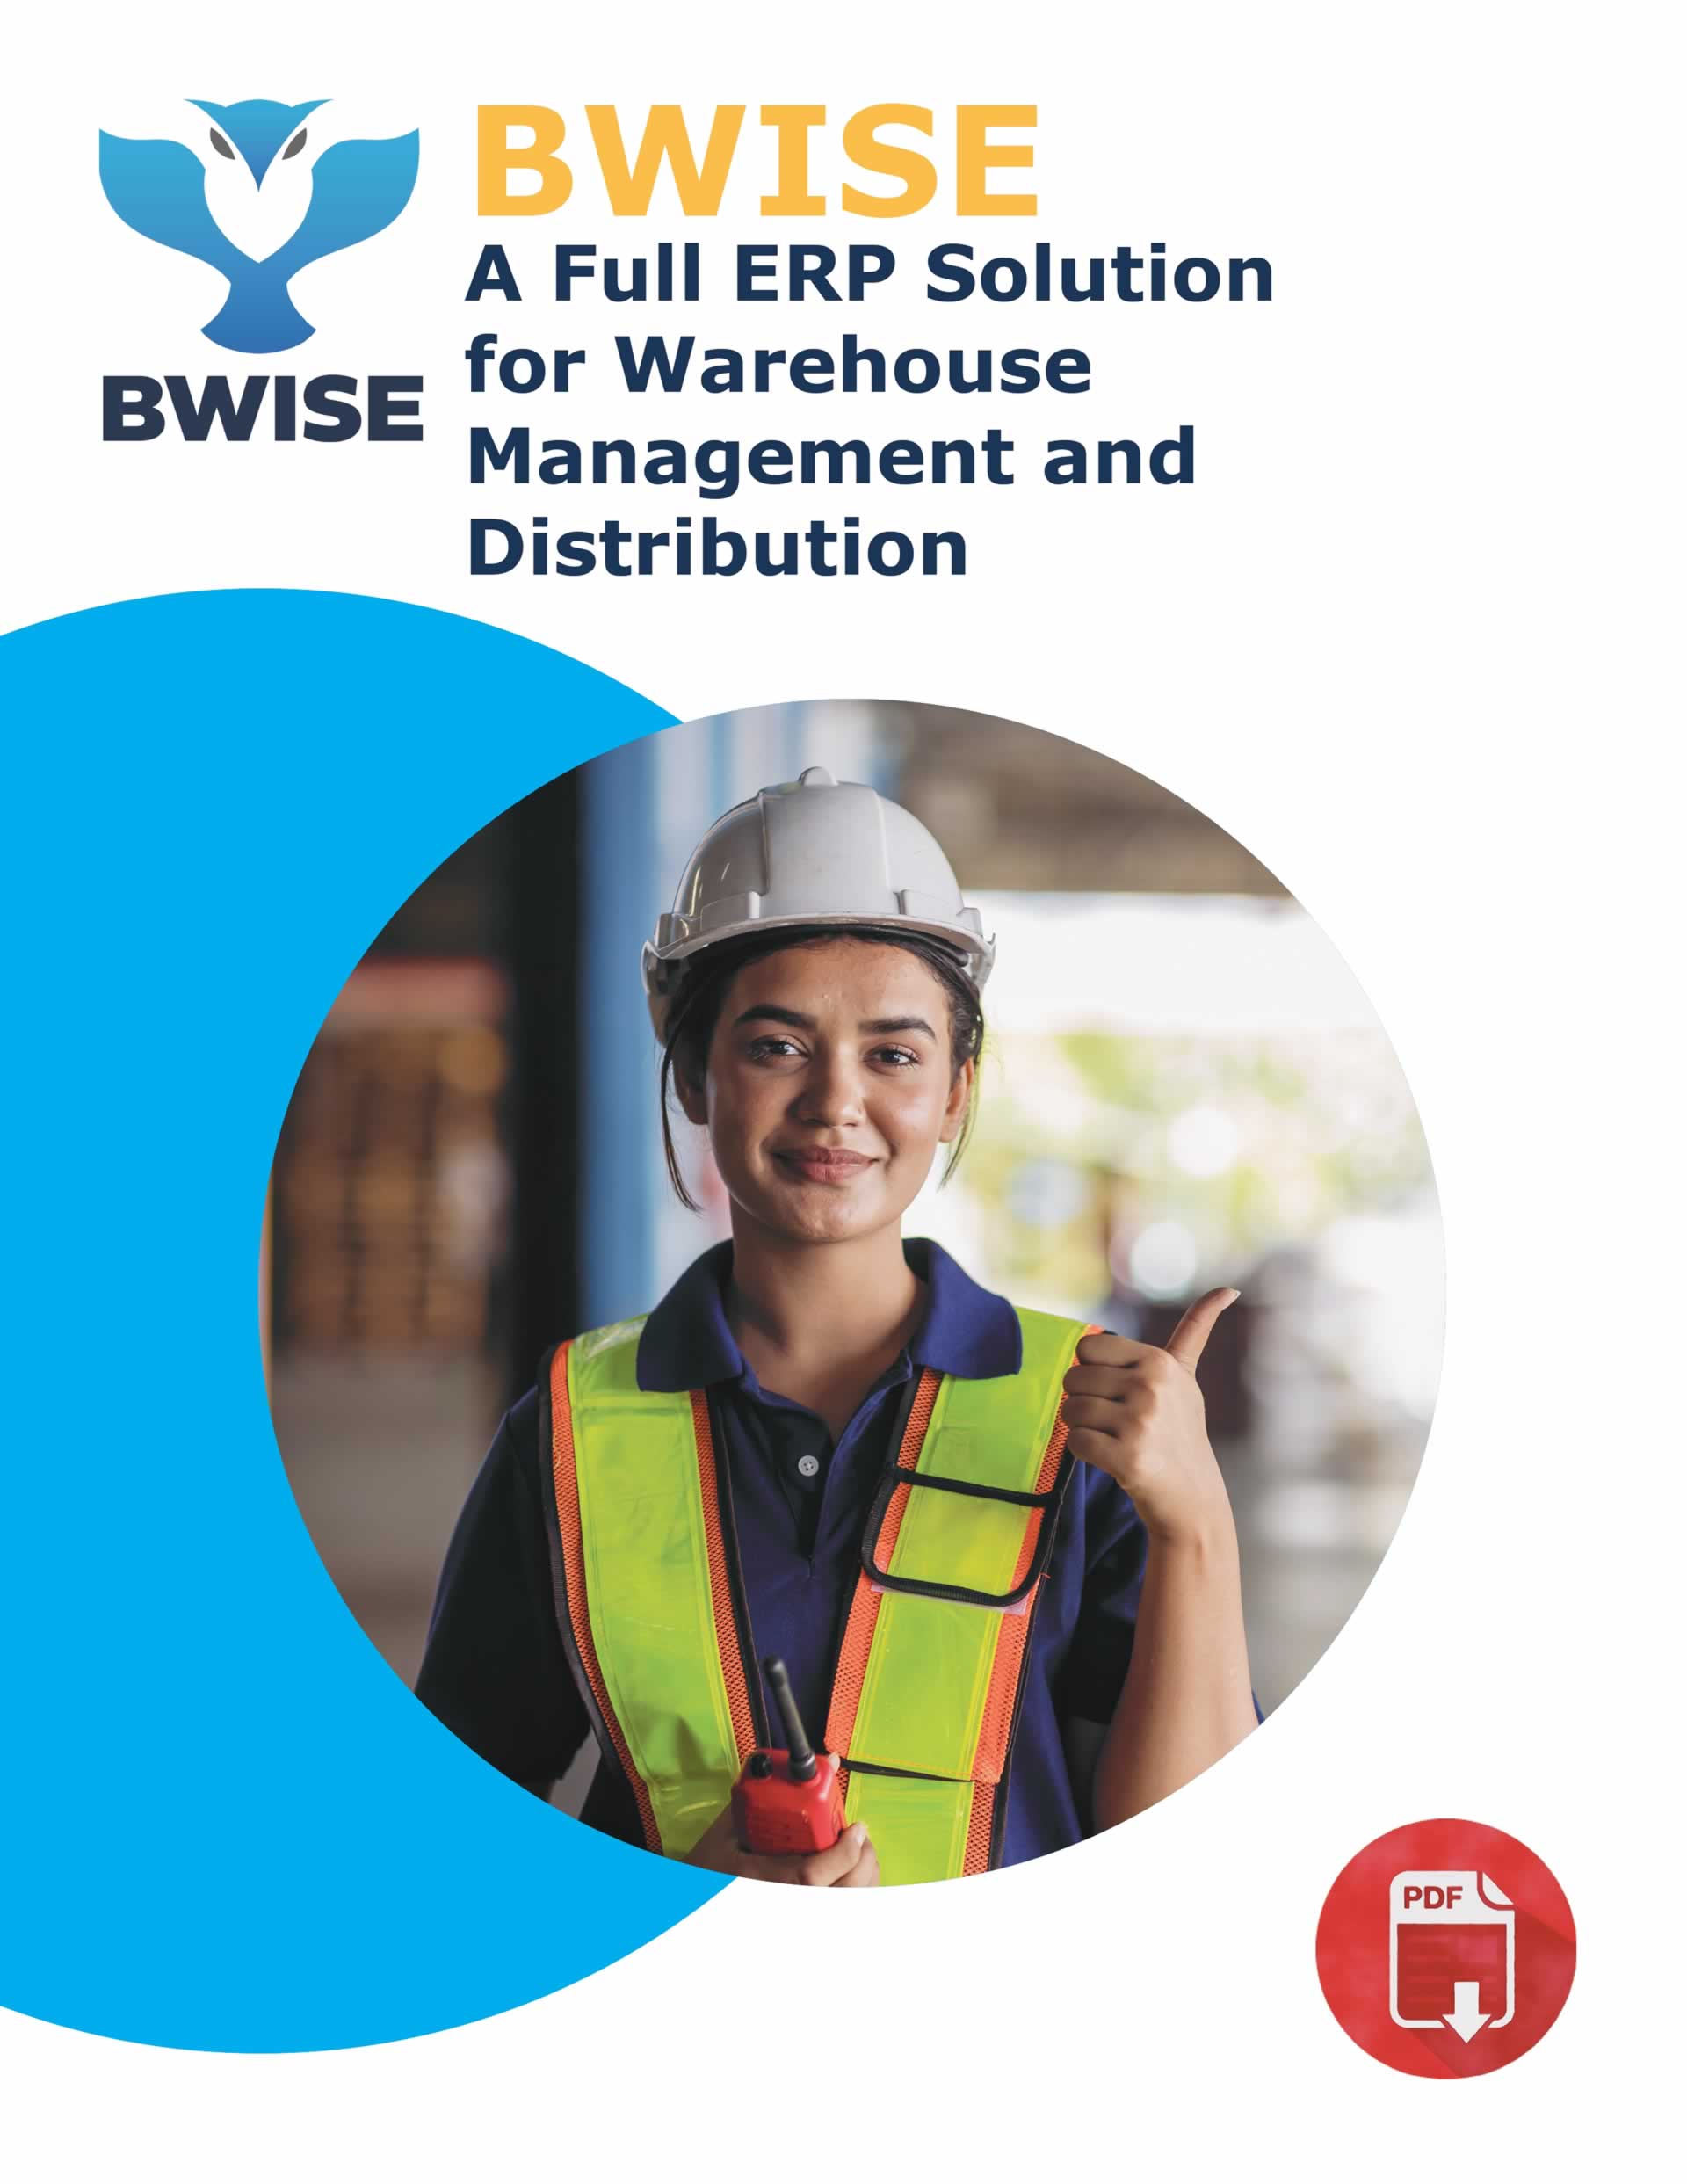 BWISE Full ERP Solution Brochure for Warehouse Management and Distribution